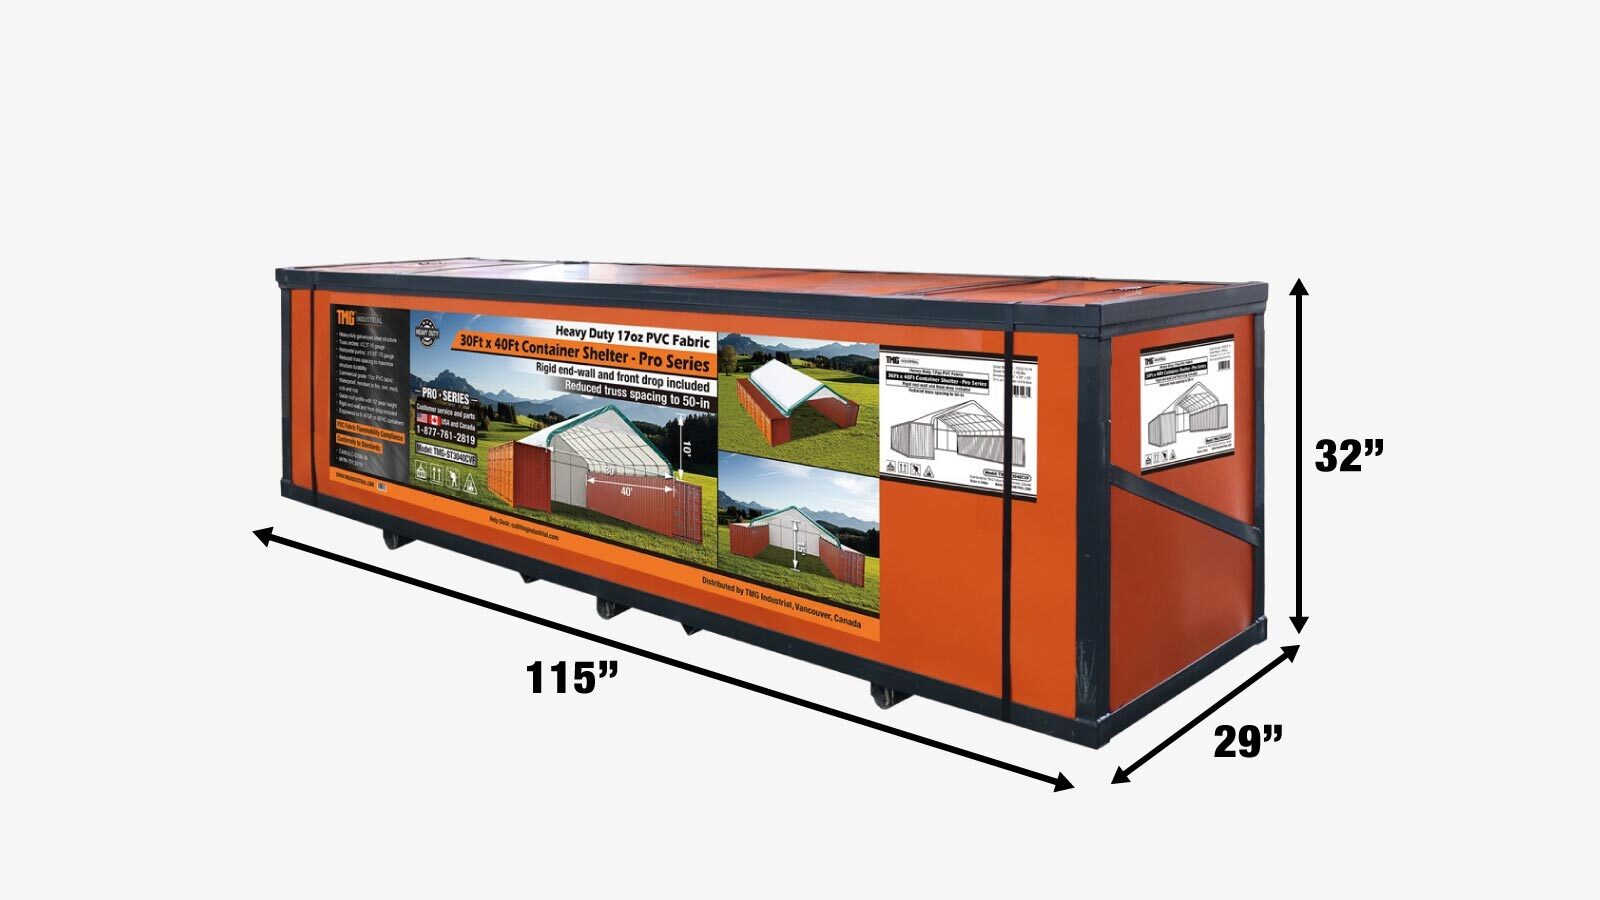 TMG Industrial 30' x 40' PVC Fabric Container Peak Roof Shelter with End Wall & Partial Front Drop Pro Series, Fire Retardant, Water Resistant, UV Protected, TMG-ST3041CVF (Previously ST3040CVF)-shipping-info-image